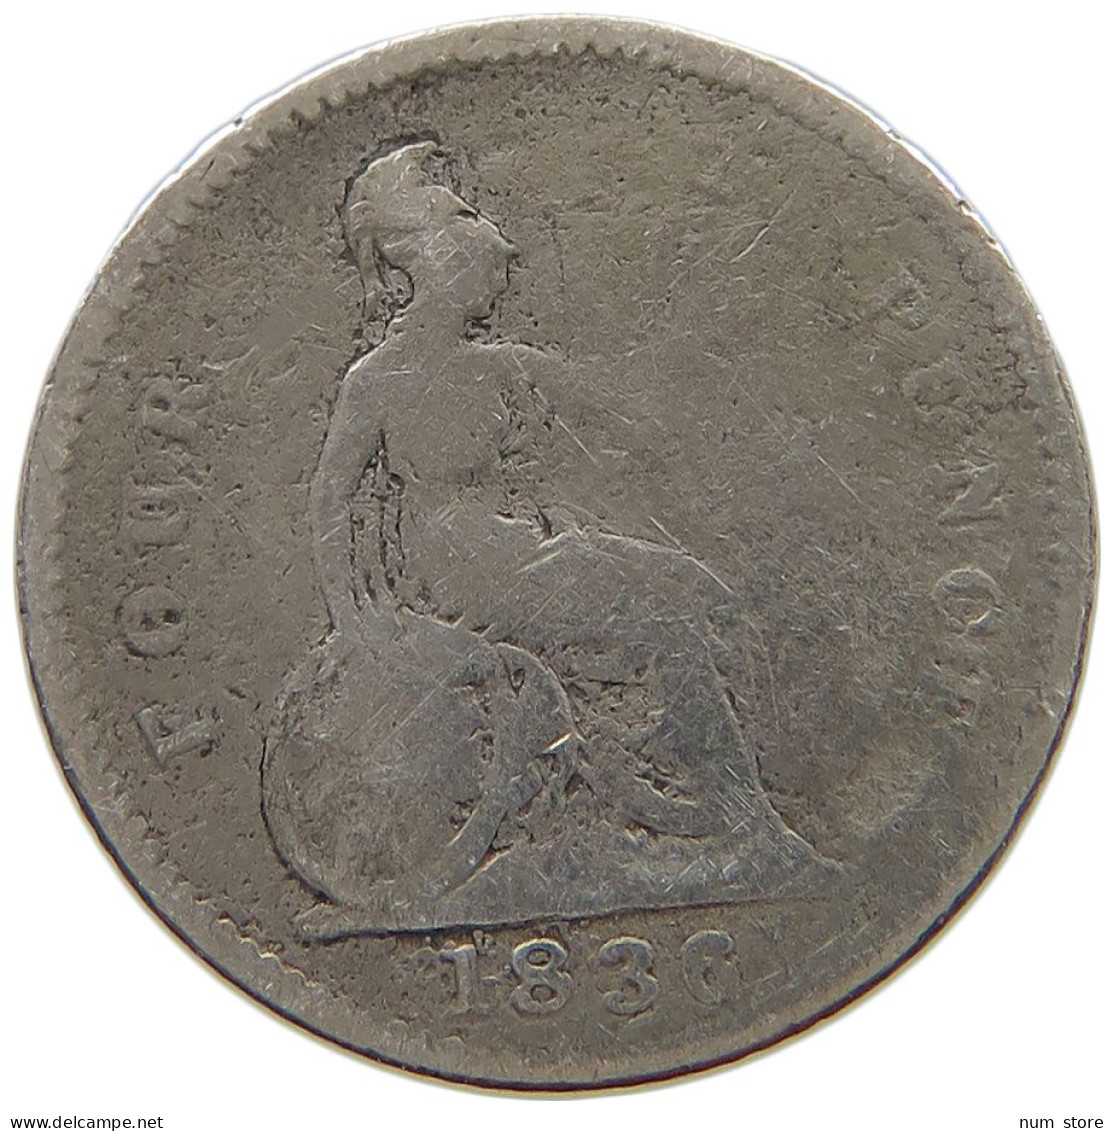 GREAT BRITAIN FOURPENCE 1836 WILLIAM IV. (1830-1837) #a081 0991 - G. 4 Pence/ Groat